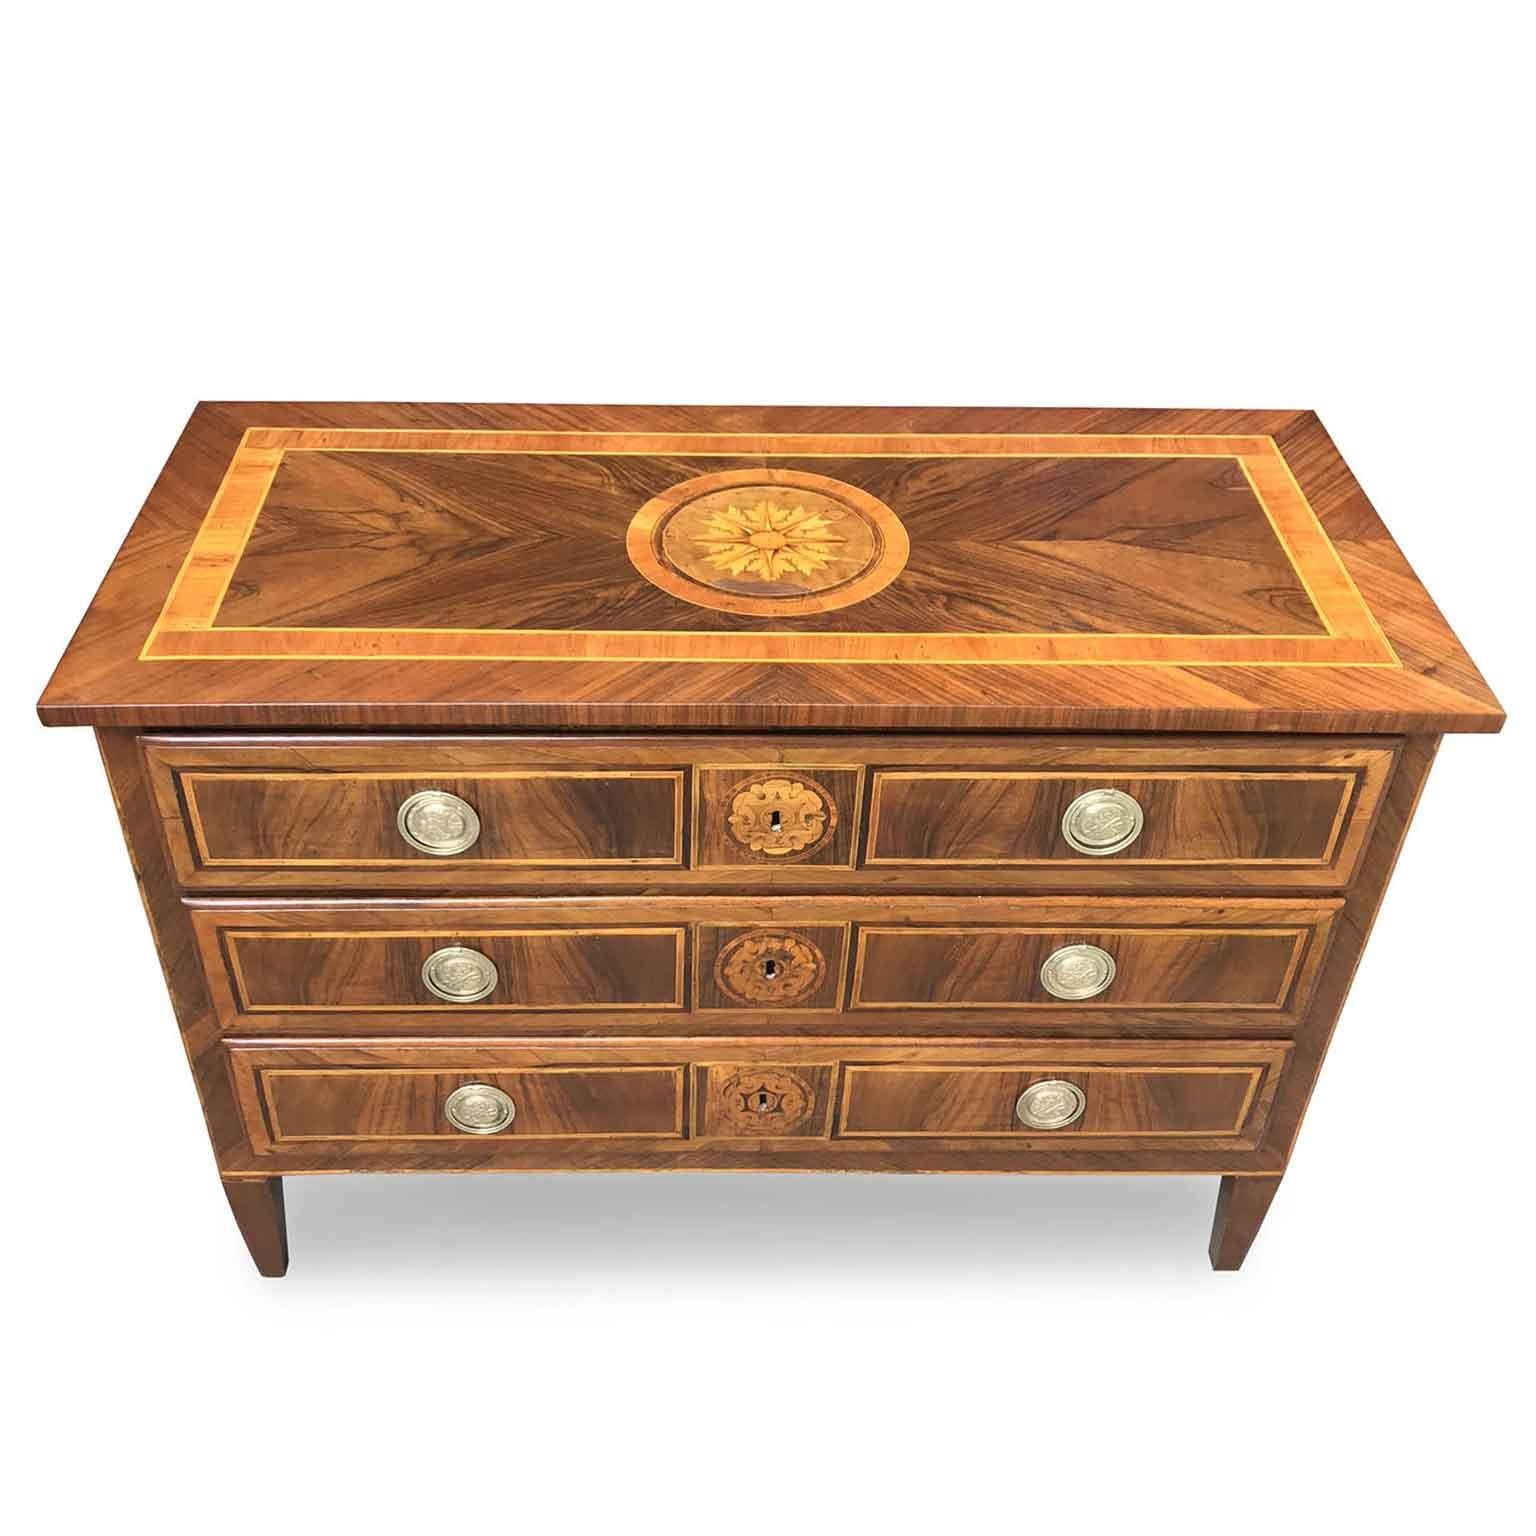 Inlay Early 19th Century Italian Directoire Chest of Drawers with Rose Marquetry